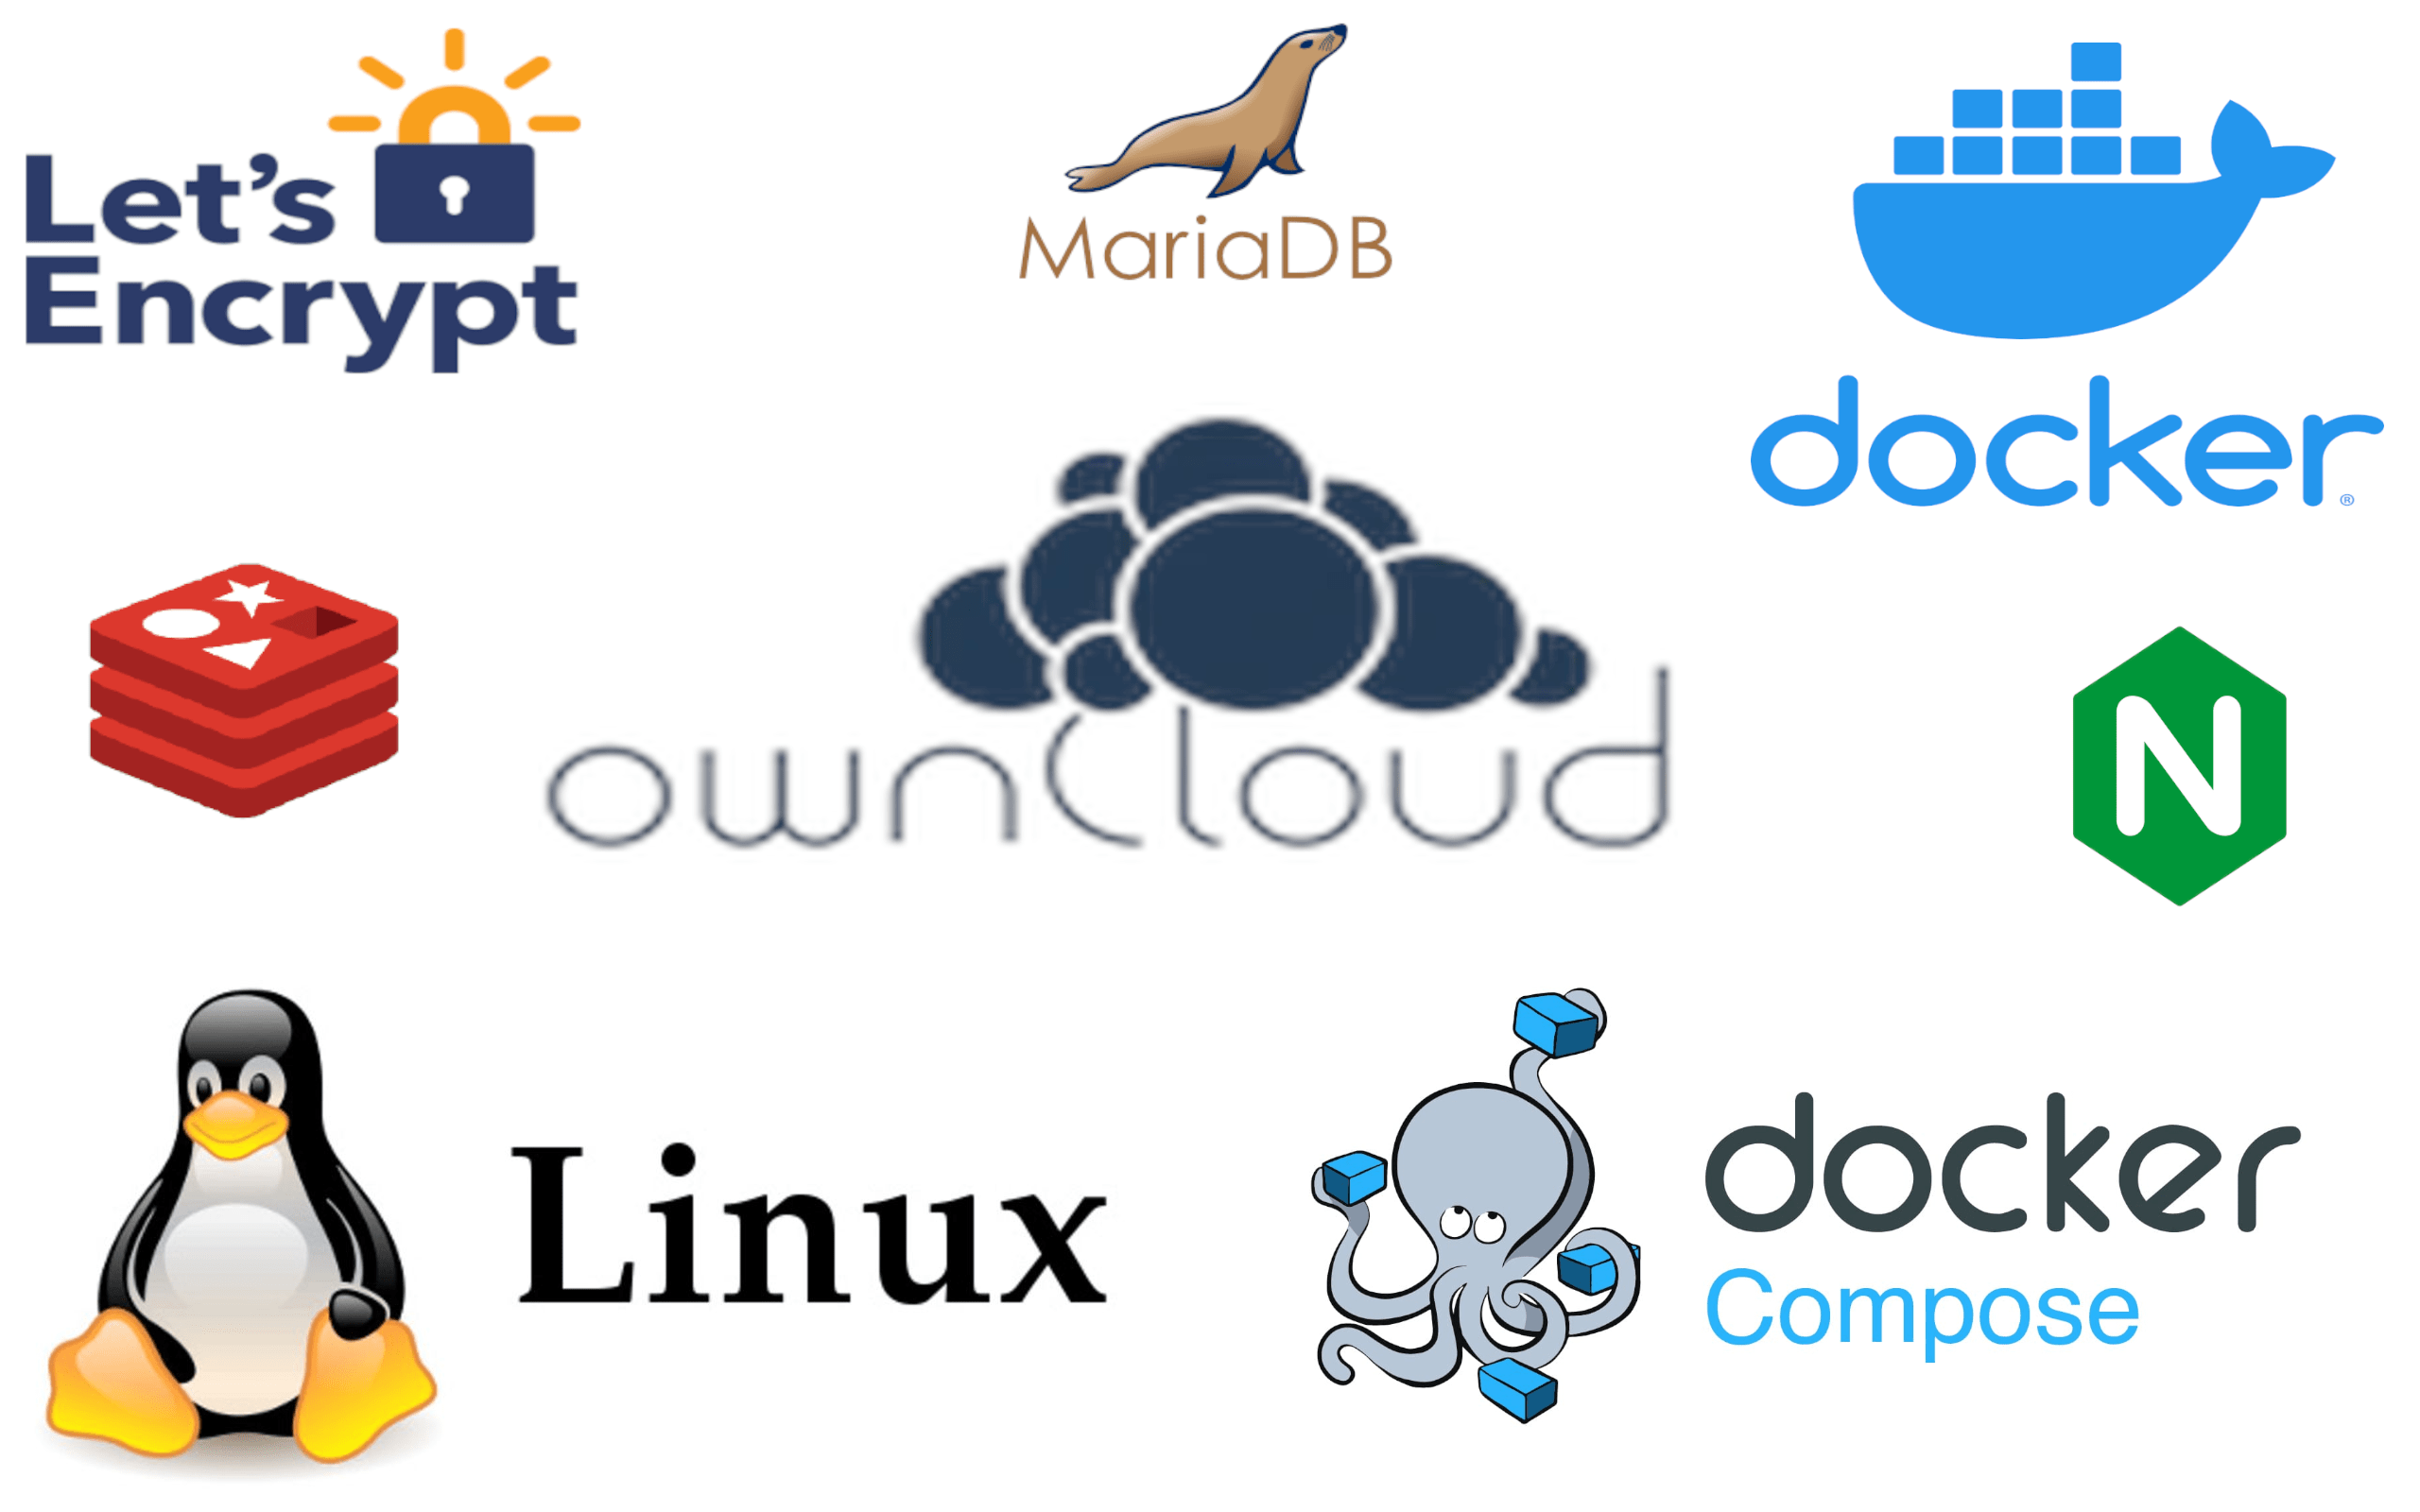 How to deploy Owncloud on Linux Server with docker